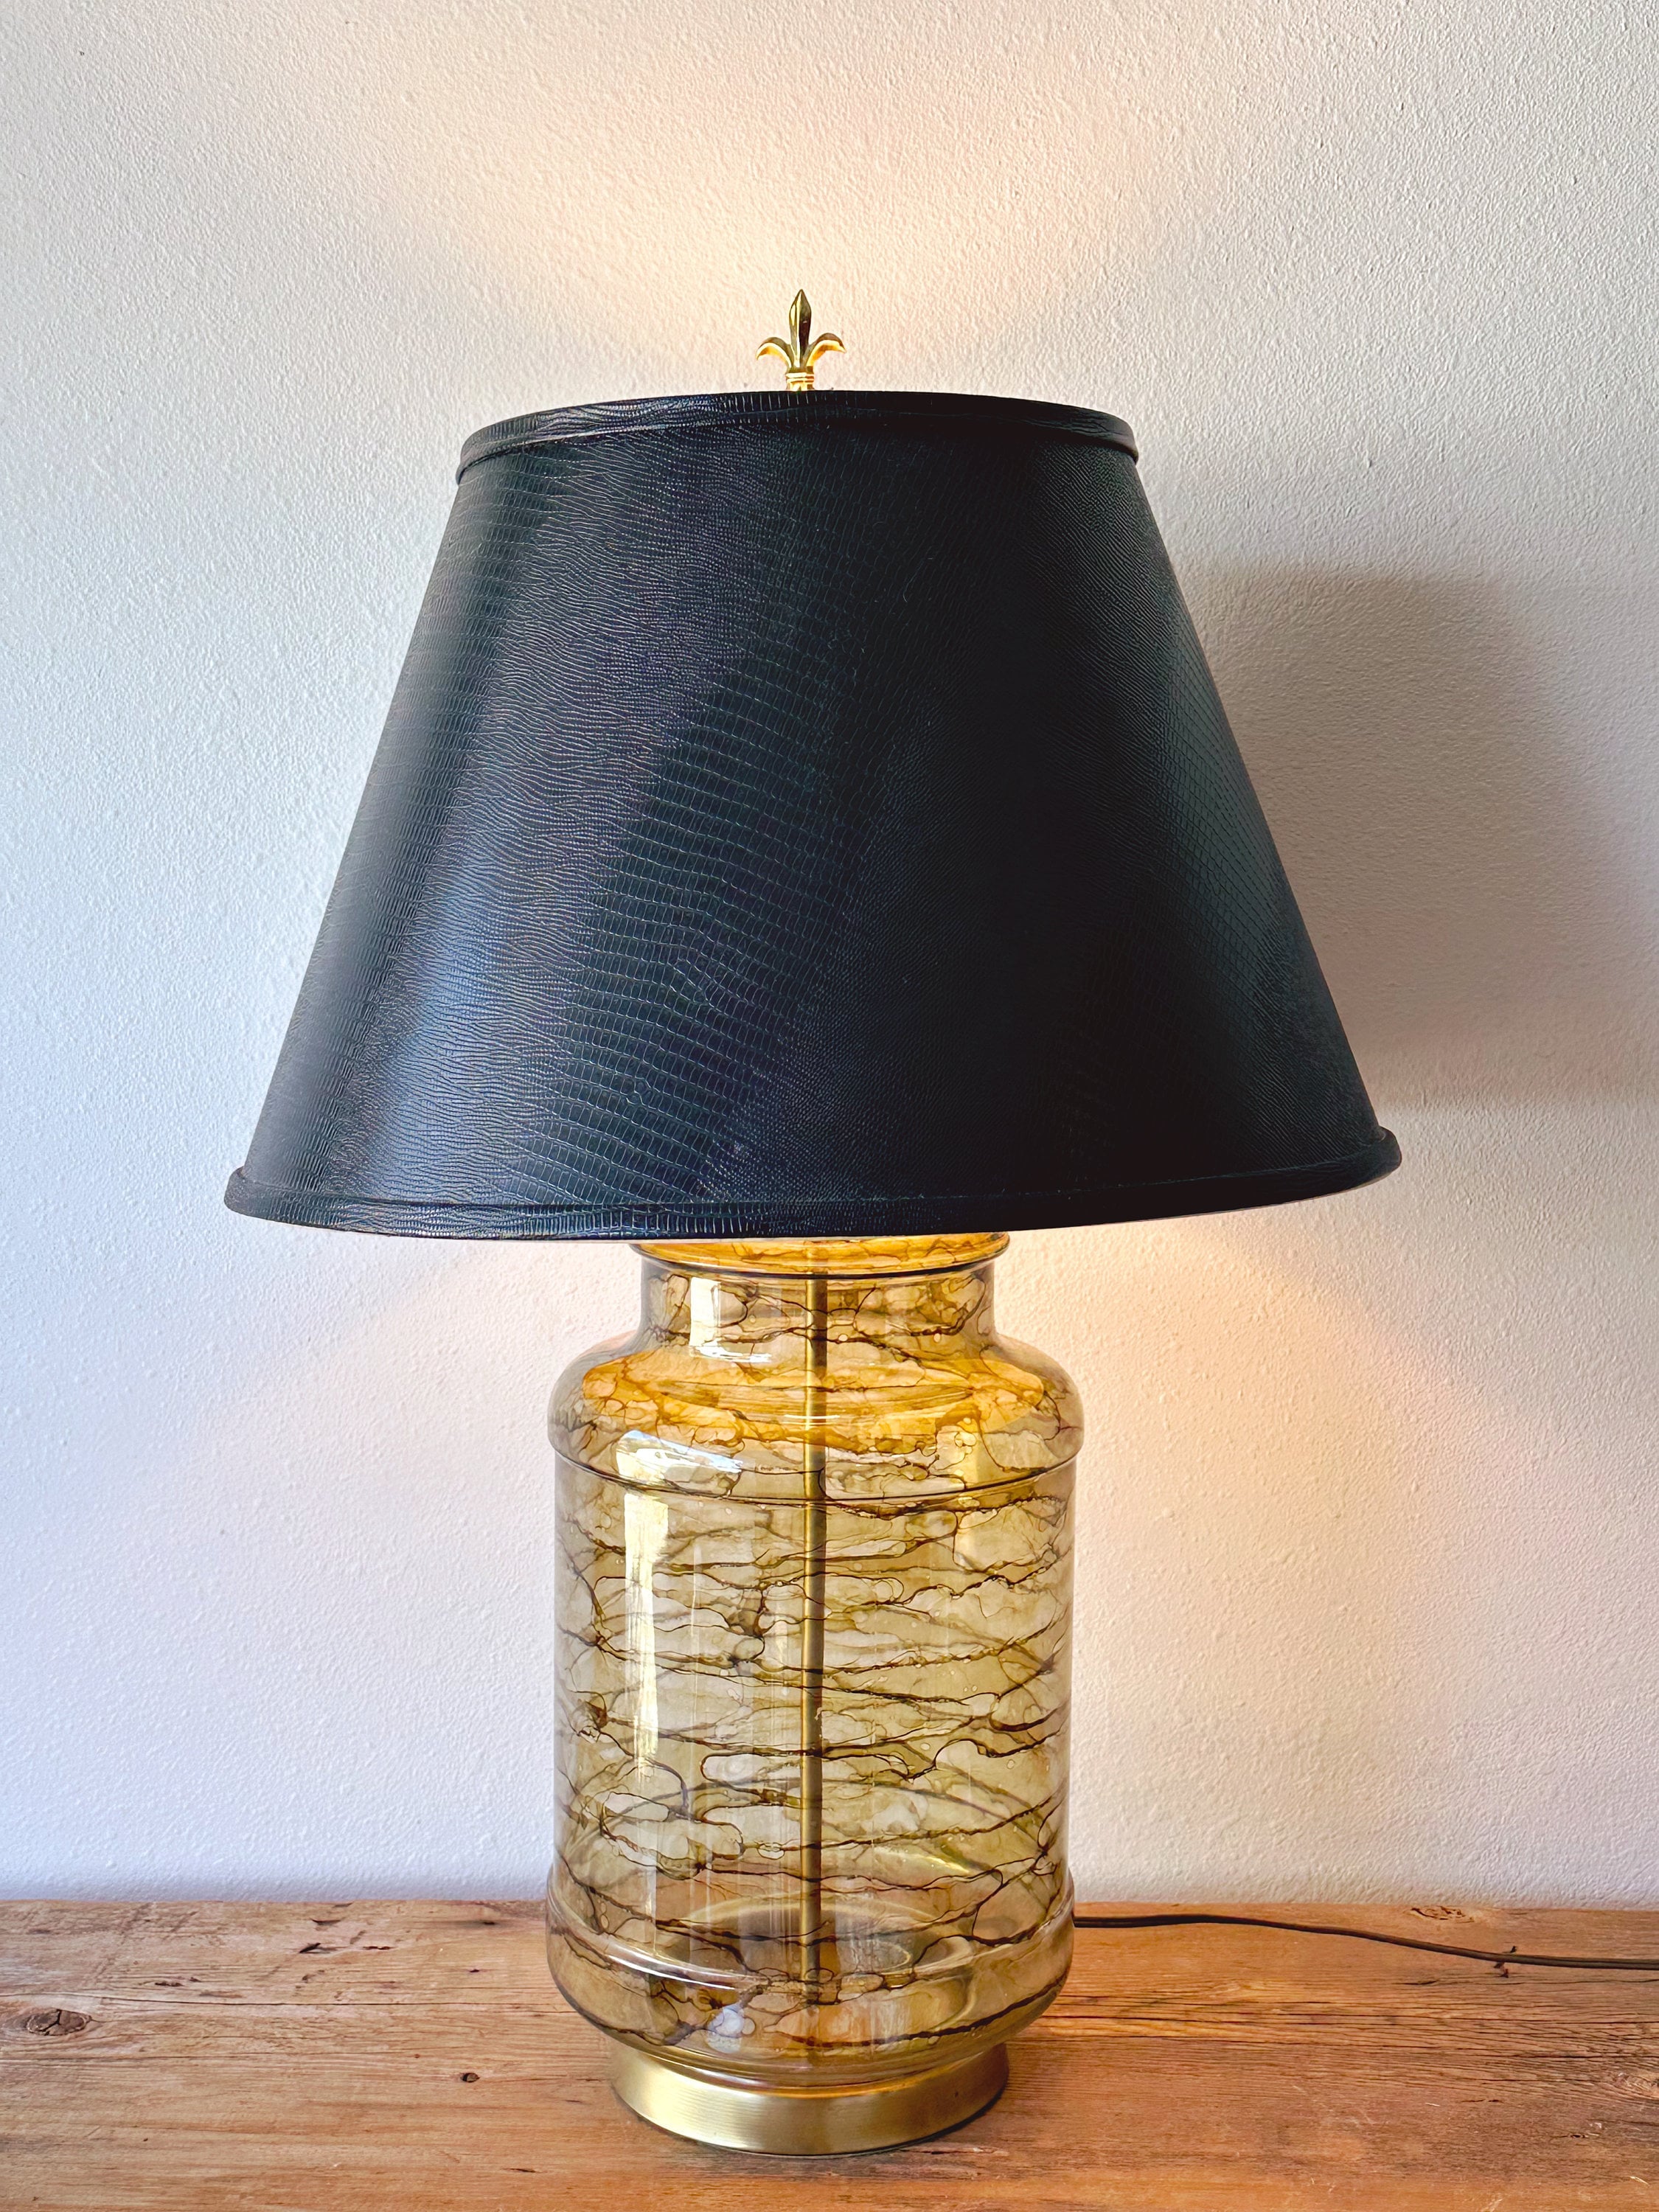 Large Vintage Tortoise Style Glass and Brass Table Lamp with Black Textured Leatherette Shade | Amber Art Glass Bedroom Lighting Decor